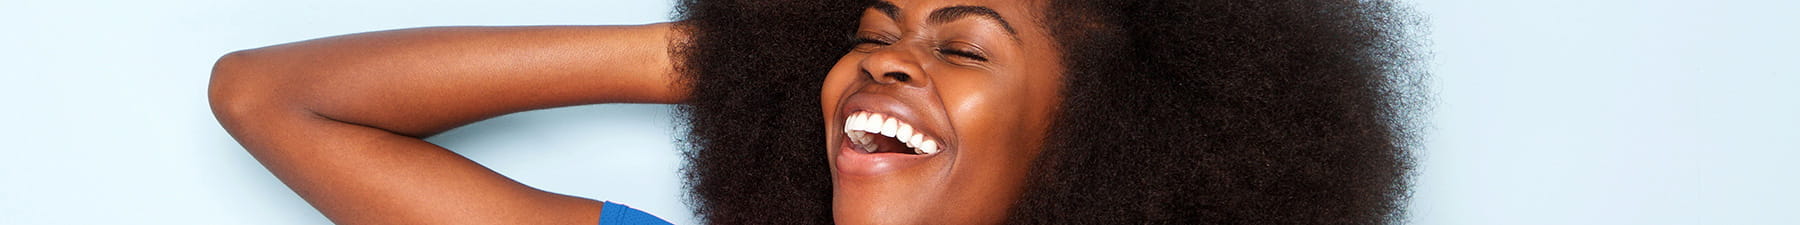 Happy smiling African American woman